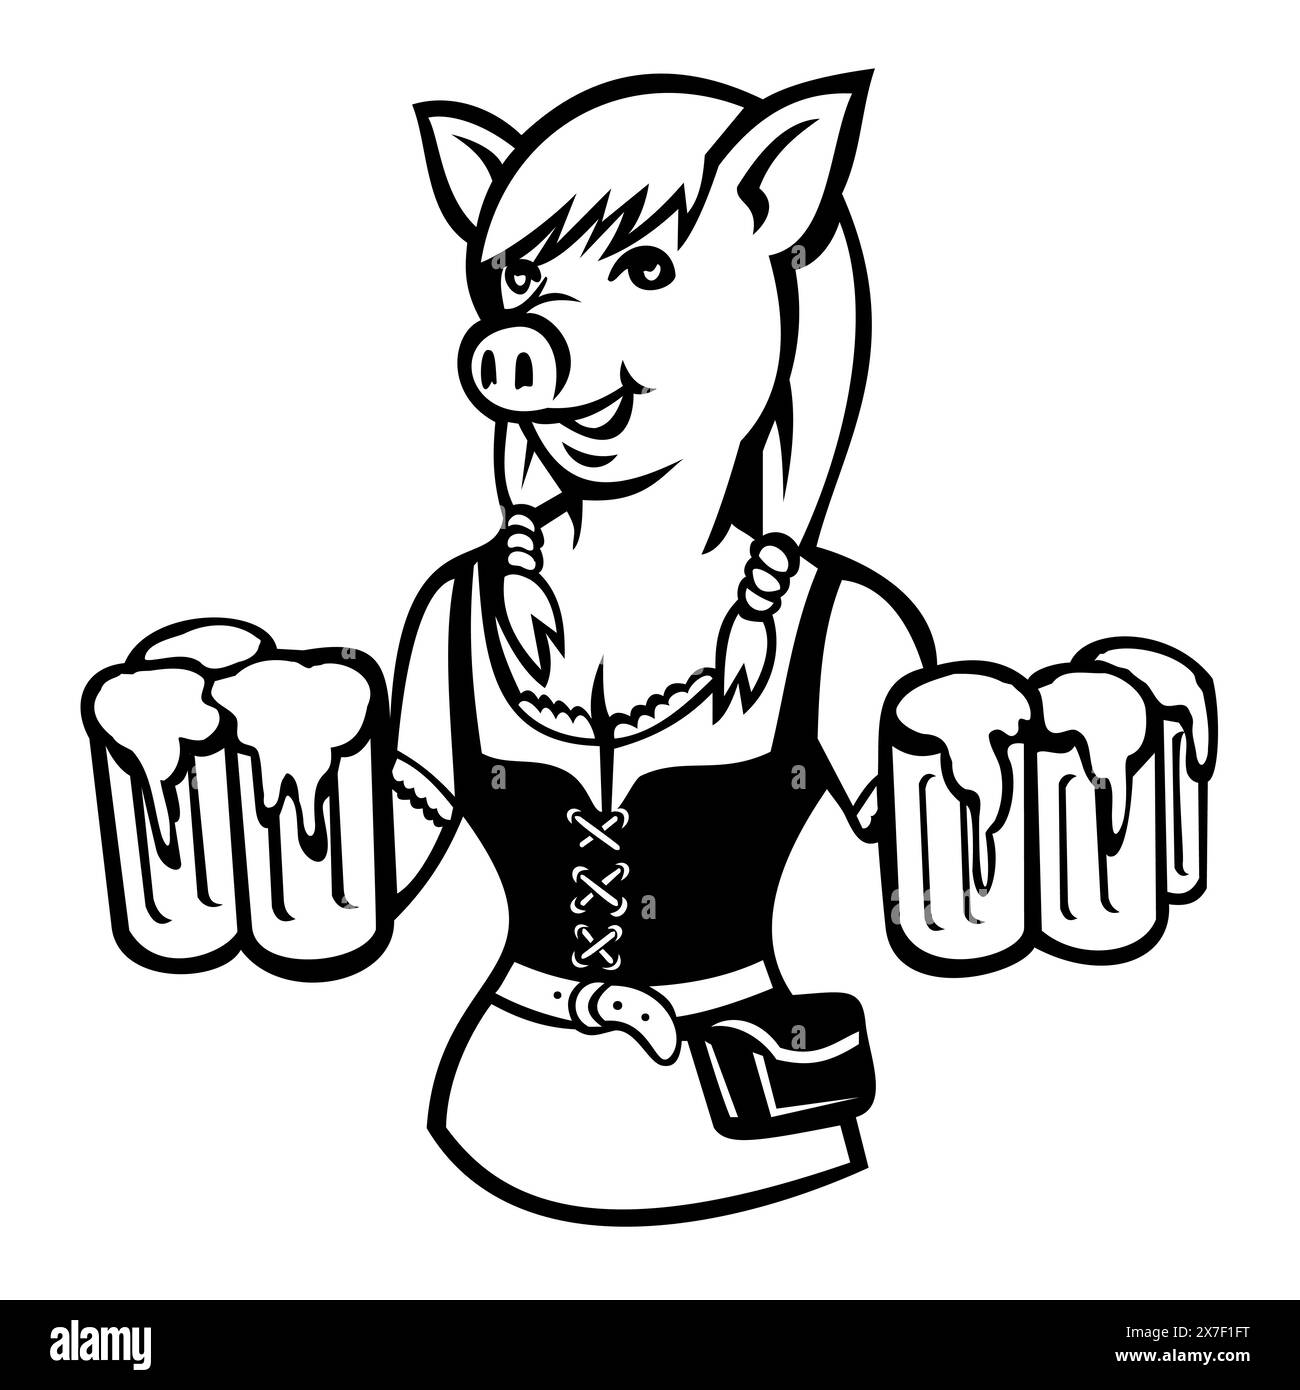 Mascot illustration of lady pig Oktoberfest waitress, beer maid or beer waitress wearing a dirndl serving six mugs of beer viewed from front on isolat Stock Vector